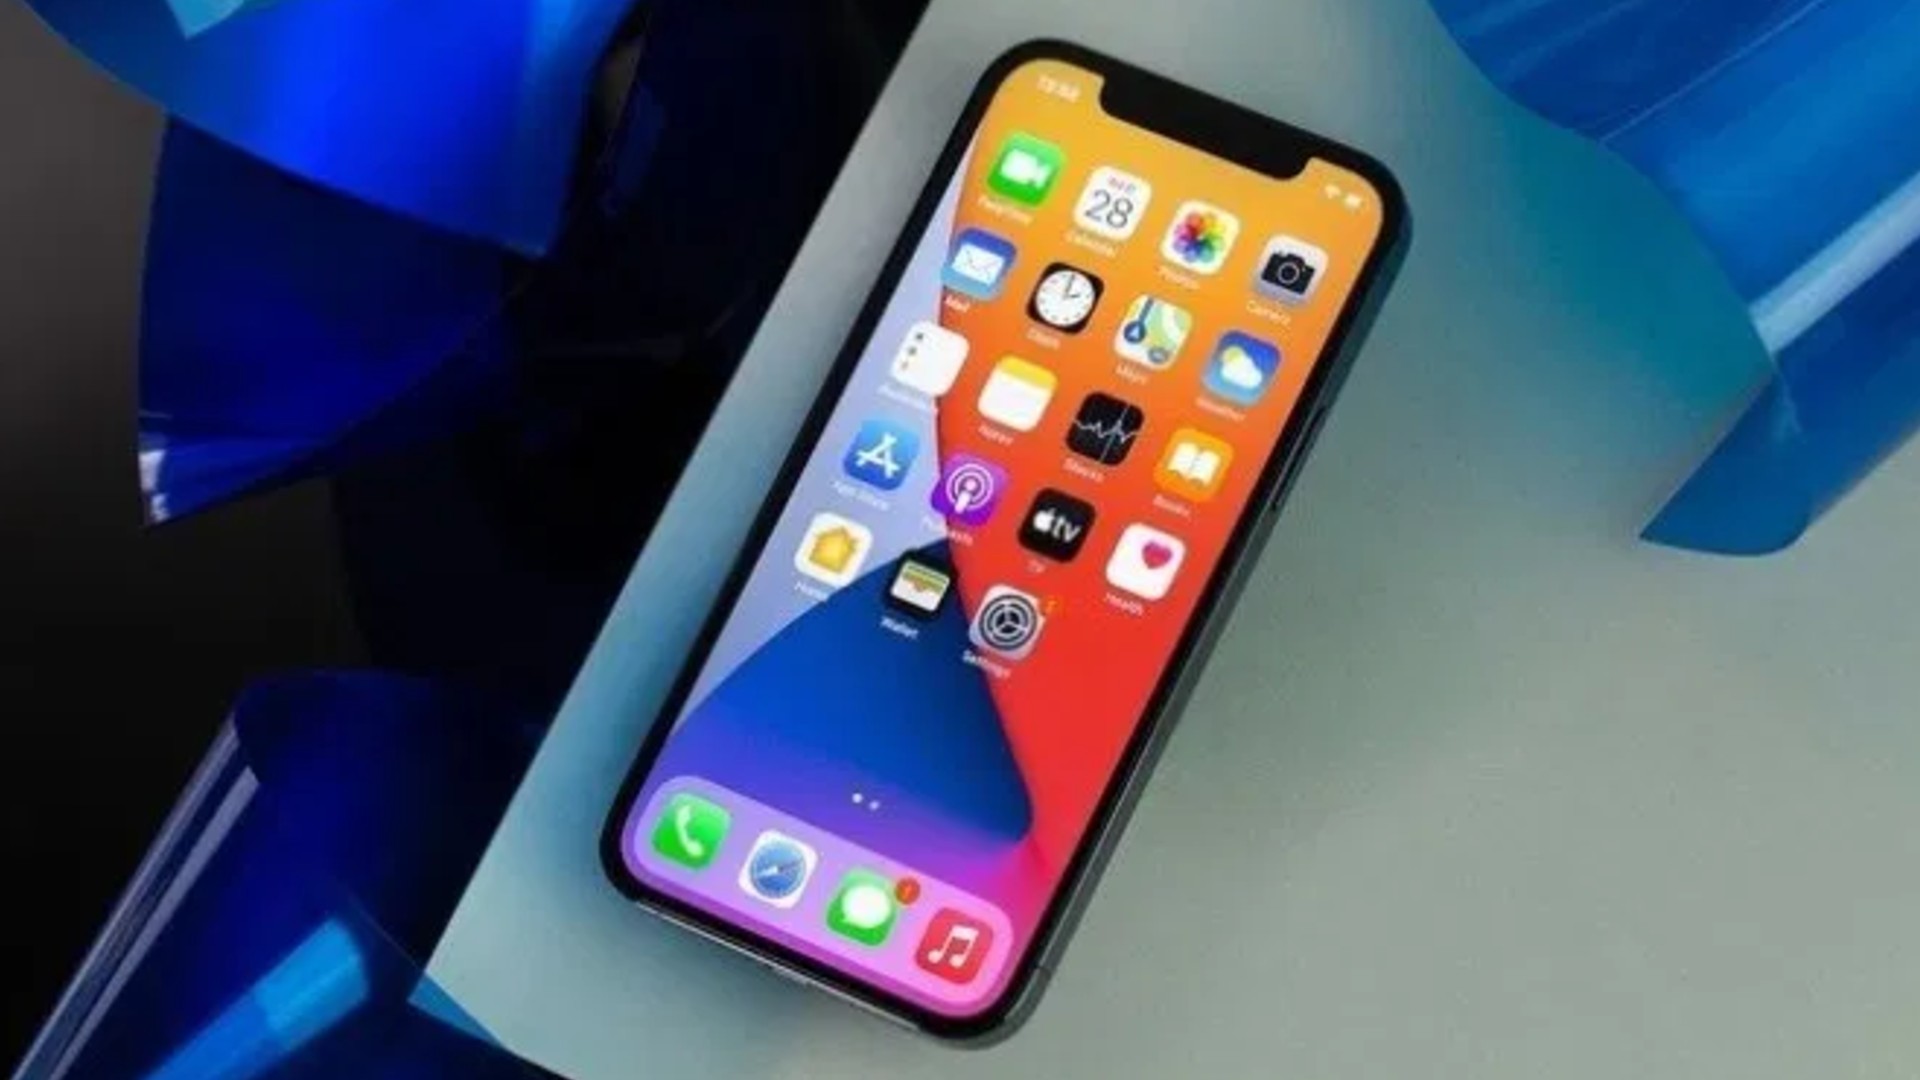 Apple ProMotion IPhone Displays: What Will Change? 240Hz Refresh Rate?